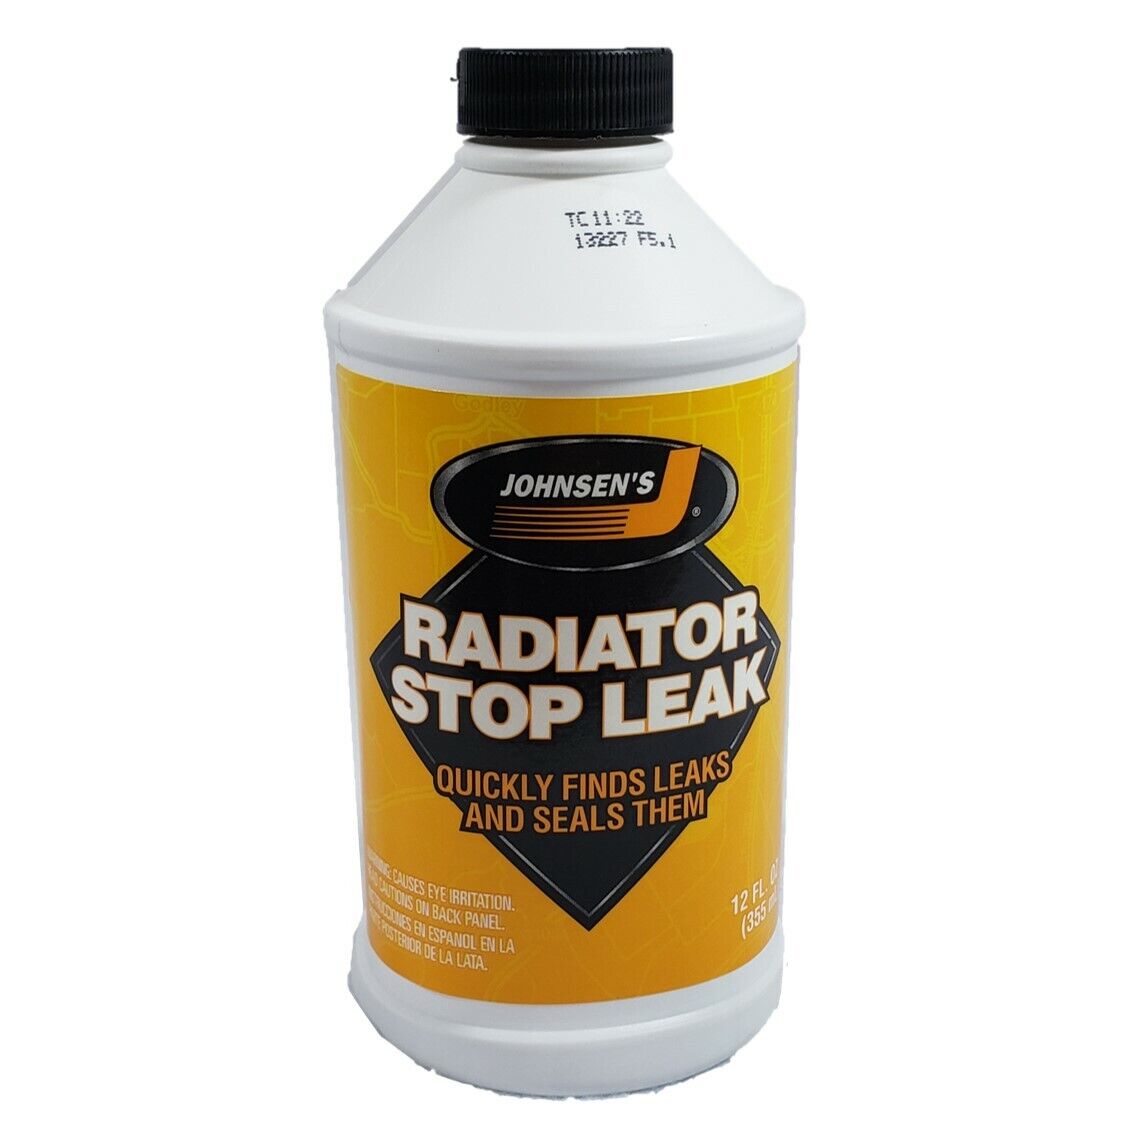 Johnsens Radiator Stop Leak Quickly Finds Leaks & Seal Them Usa 12oz Bottle